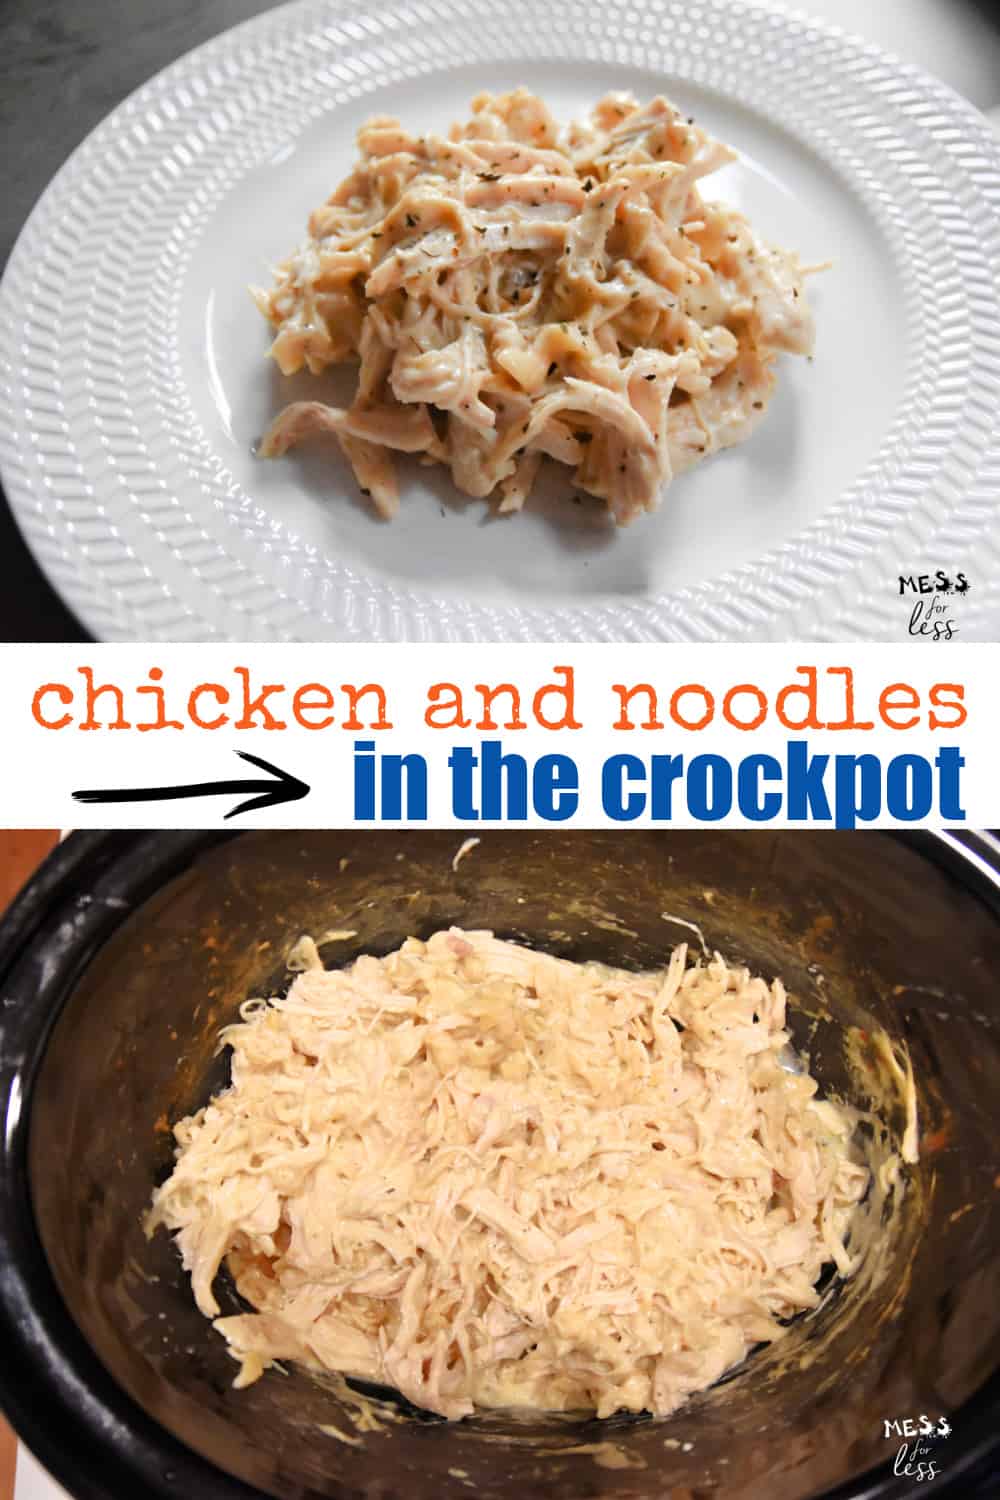 This Crockpot Chicken and Noodles recipe is the ultimate in comfort food and perfect when you are pressed for time as you can just throw it in the slow cooker and walk away. After a few hours, you'll have moist and deliciously flavored chicken that goes perfectly with egg noodles.